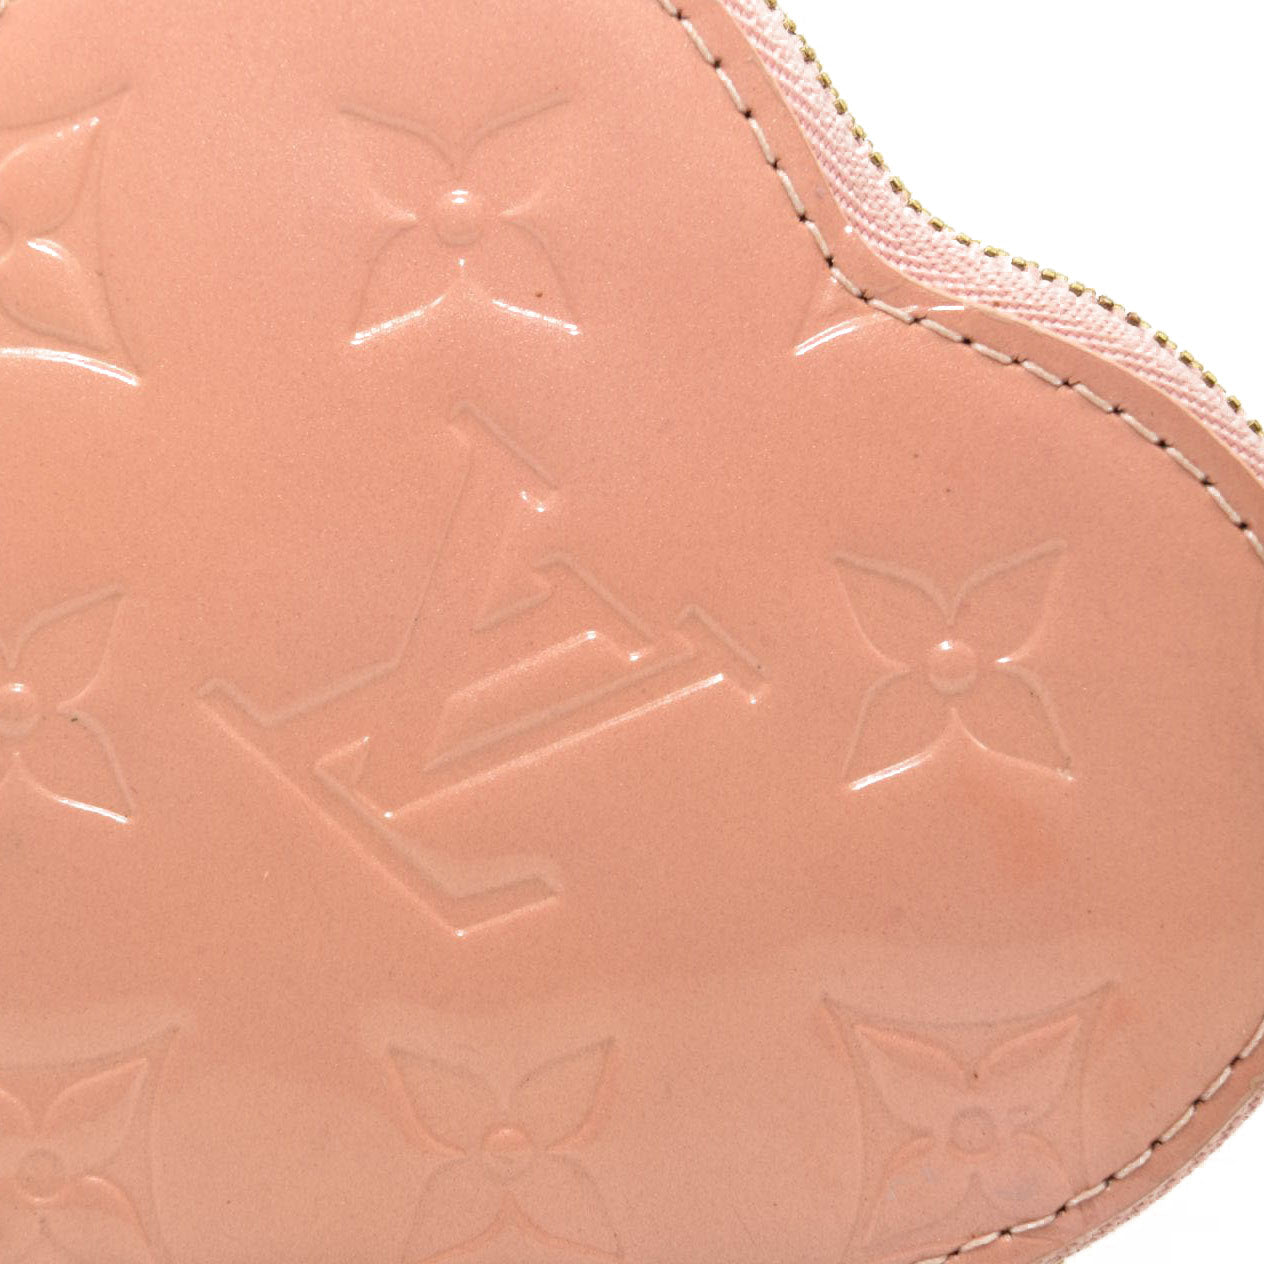 Shop Louis Vuitton's stylish baby collection